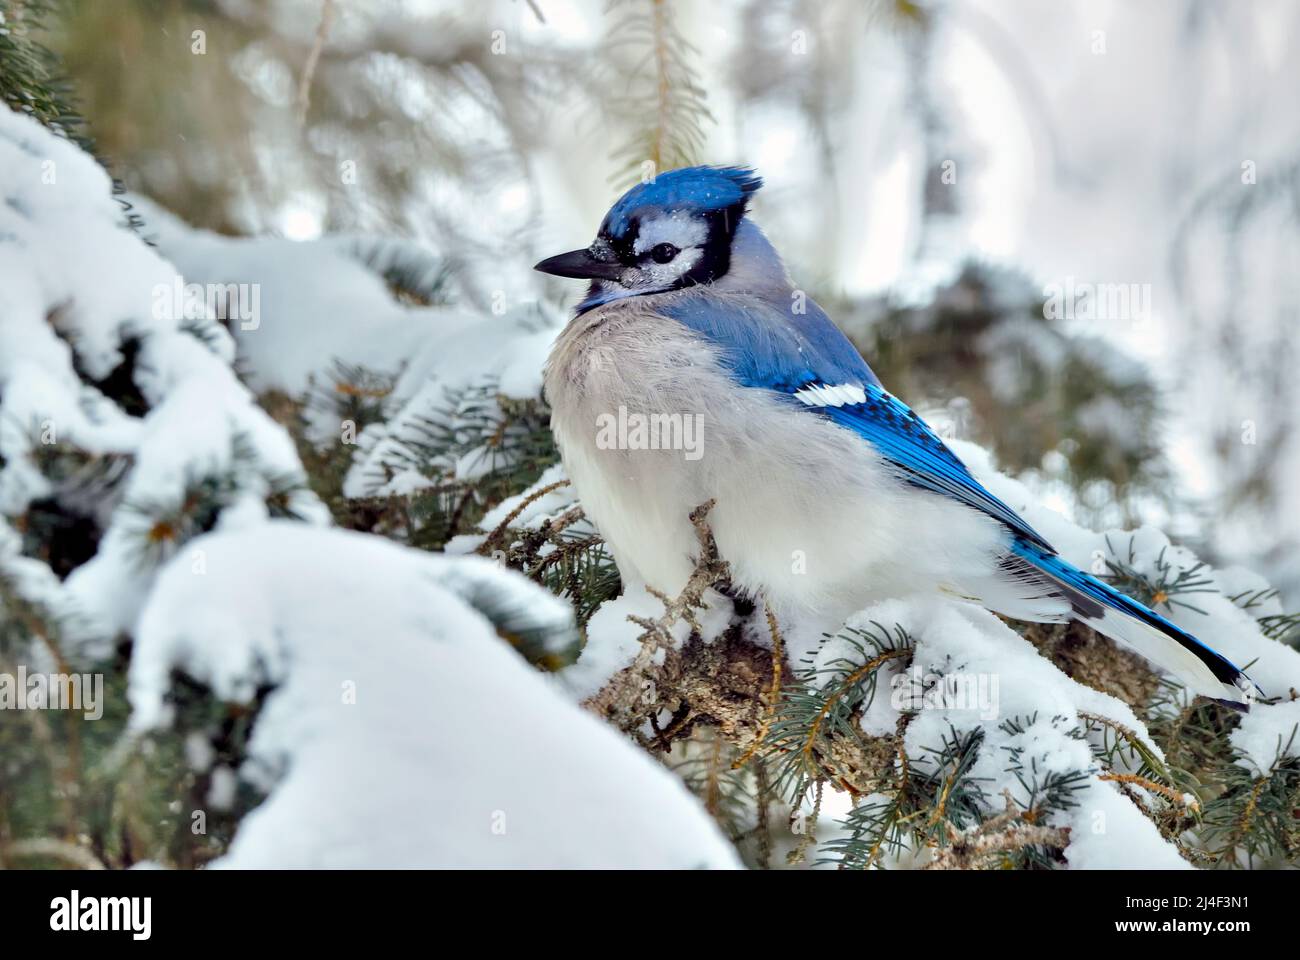 An Eastern Blue Jay (Cyanocitta cristata) perched on a snow covered spruce tree branch in rural Alberta Canada. Stock Photo